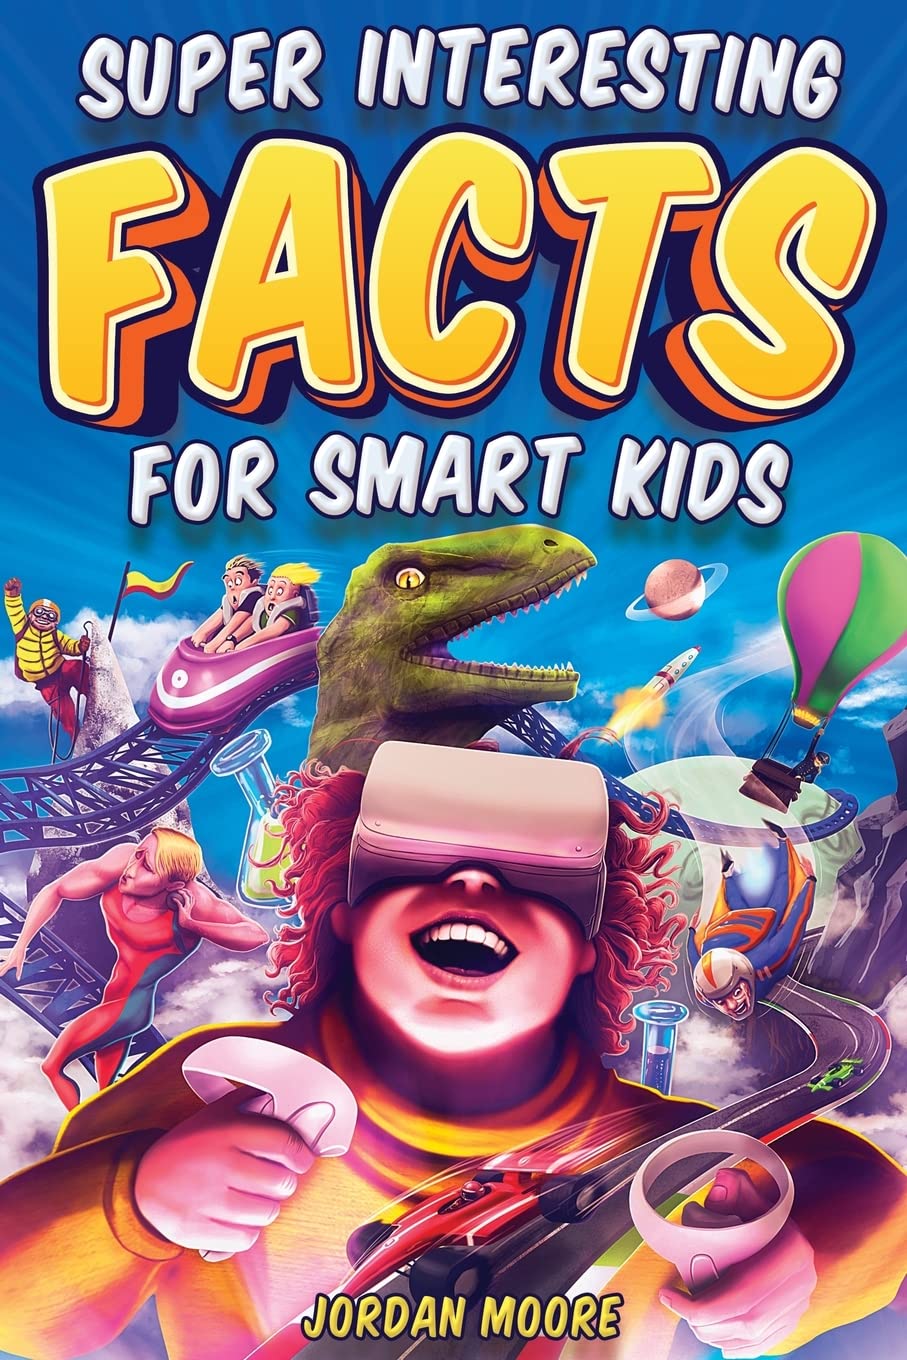 Super Interesting Facts For Smart Kids-1272 Fun Facts About Science-Animals-Earth and Everything in Between-Stumbit Kids